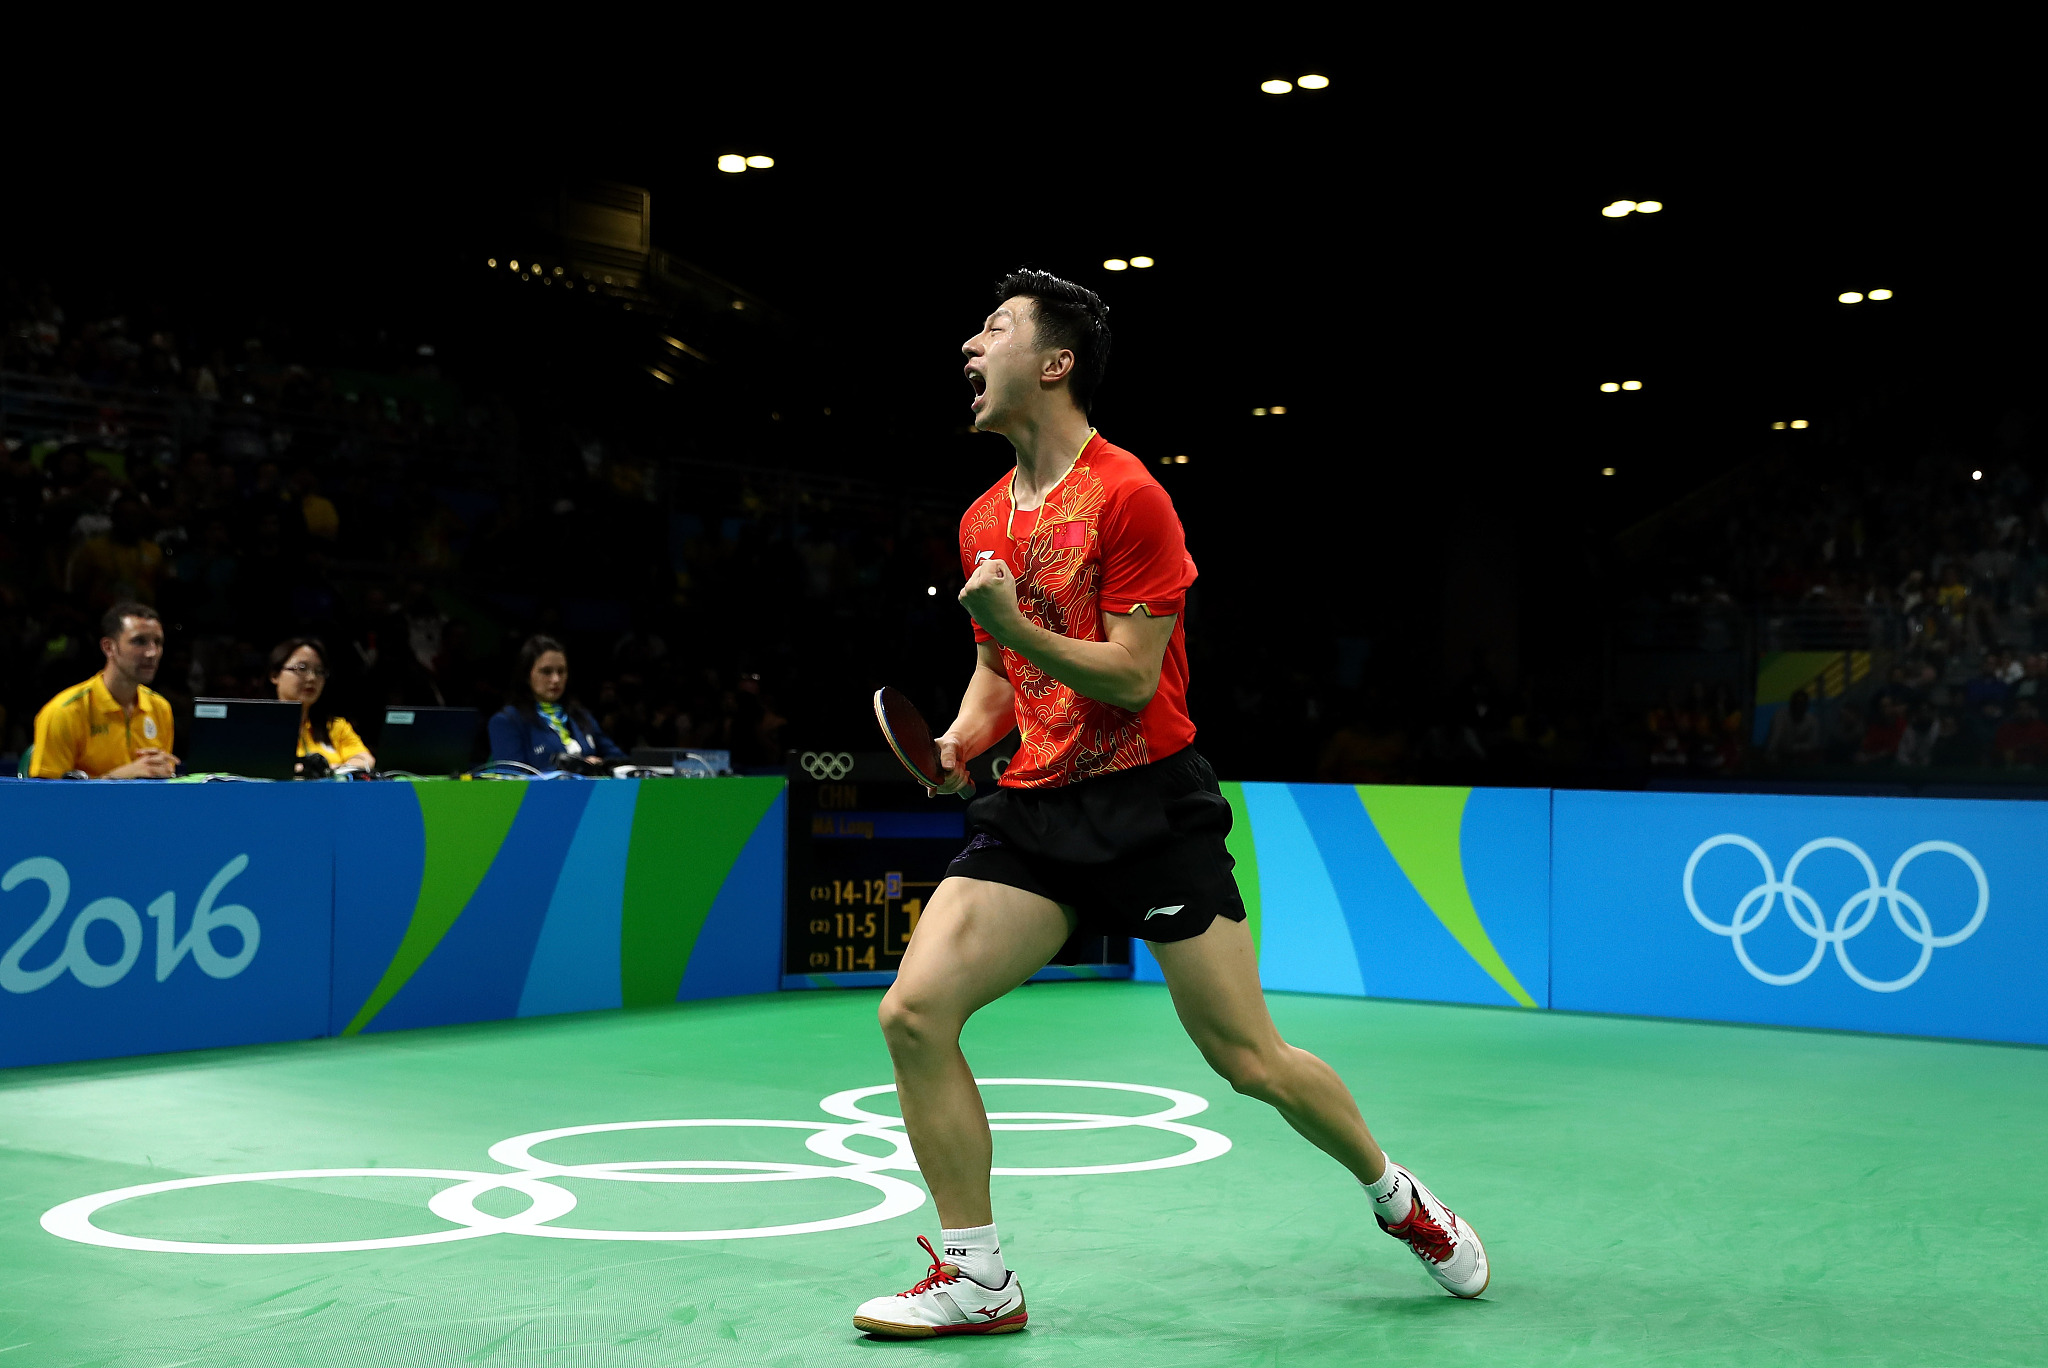 Ma Long celebrates after winning the table tennis men's singles title after defeating compatriot Zhang Jike (not pictured) during the Rio 2016 Olympic Games in Rio de Janeiro, Brazil, August 11, 2016. /CFP